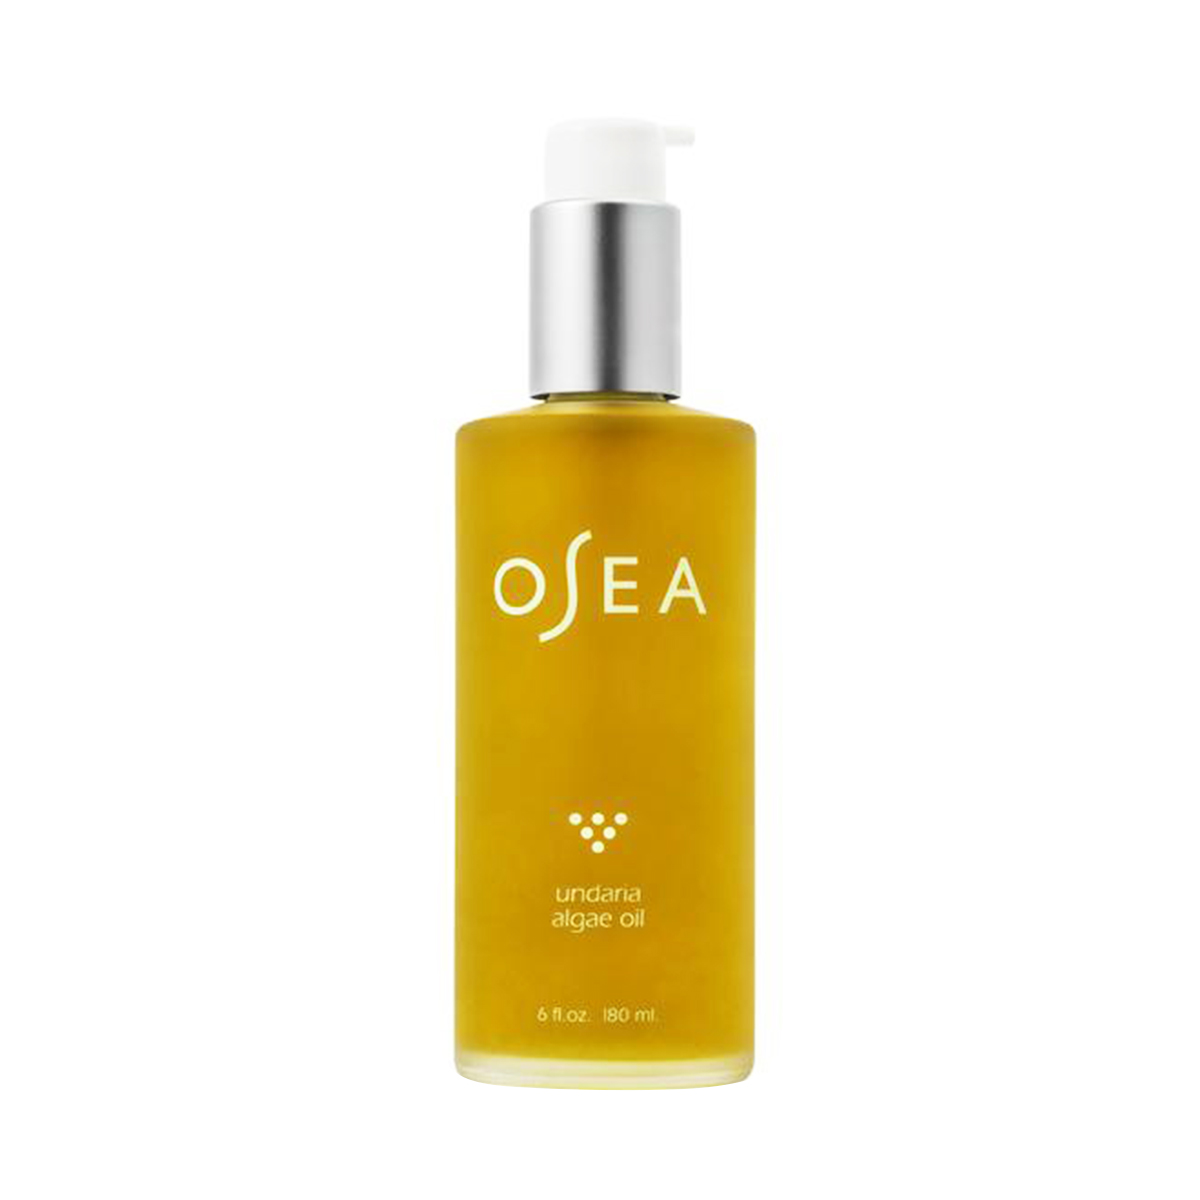 Victoria Beckham Is Obsessed With This Exotic Organic Body Oil, So I Tried It